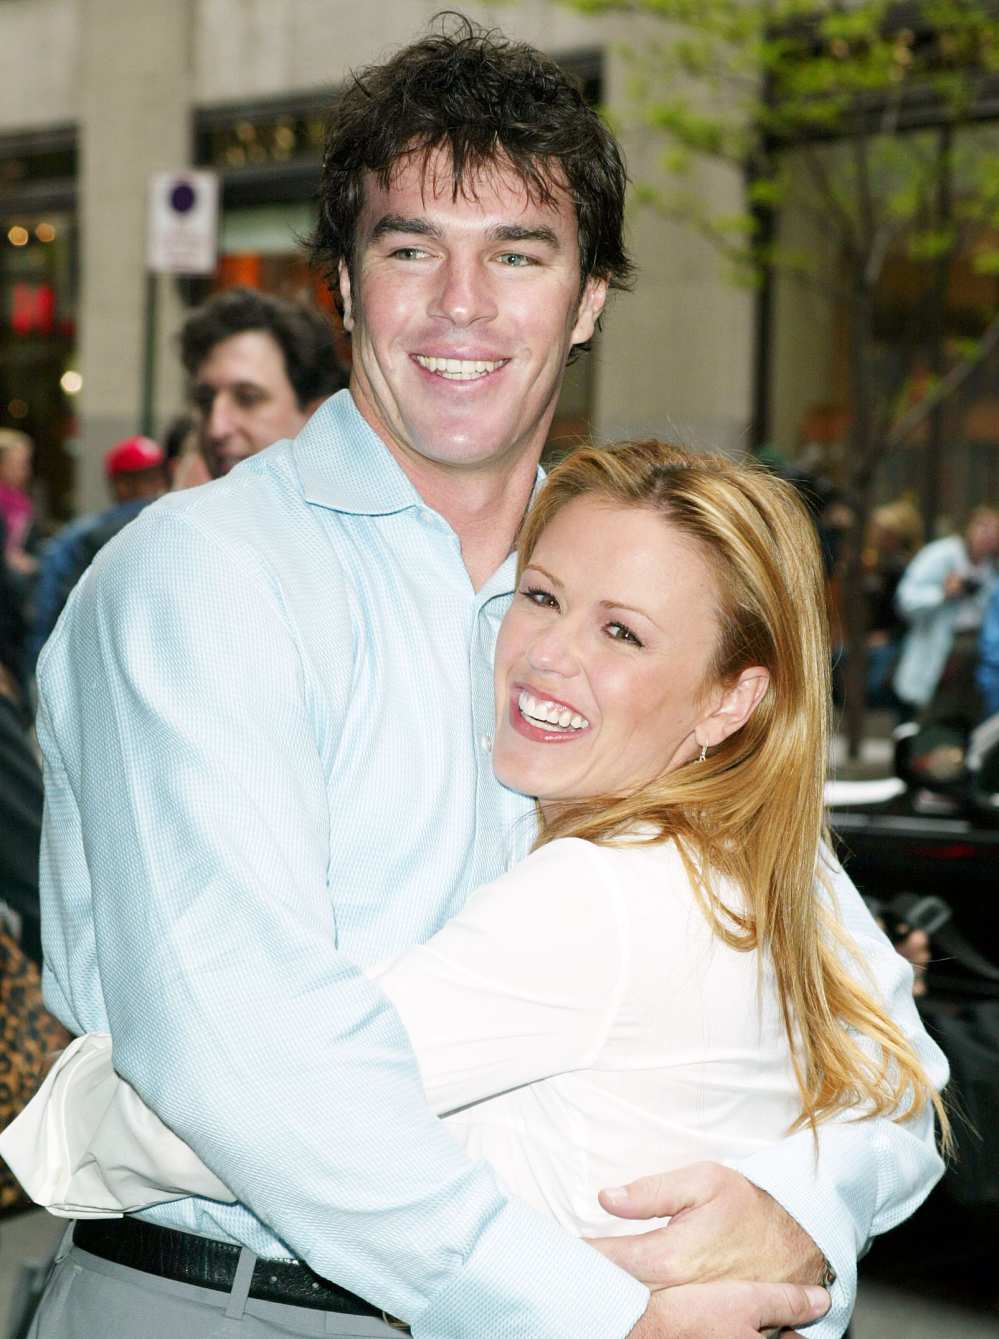 Trista and Ryan in 2003 Trista Sutter Says Bachelor Contestants Should Know Producers Edit Story Lines